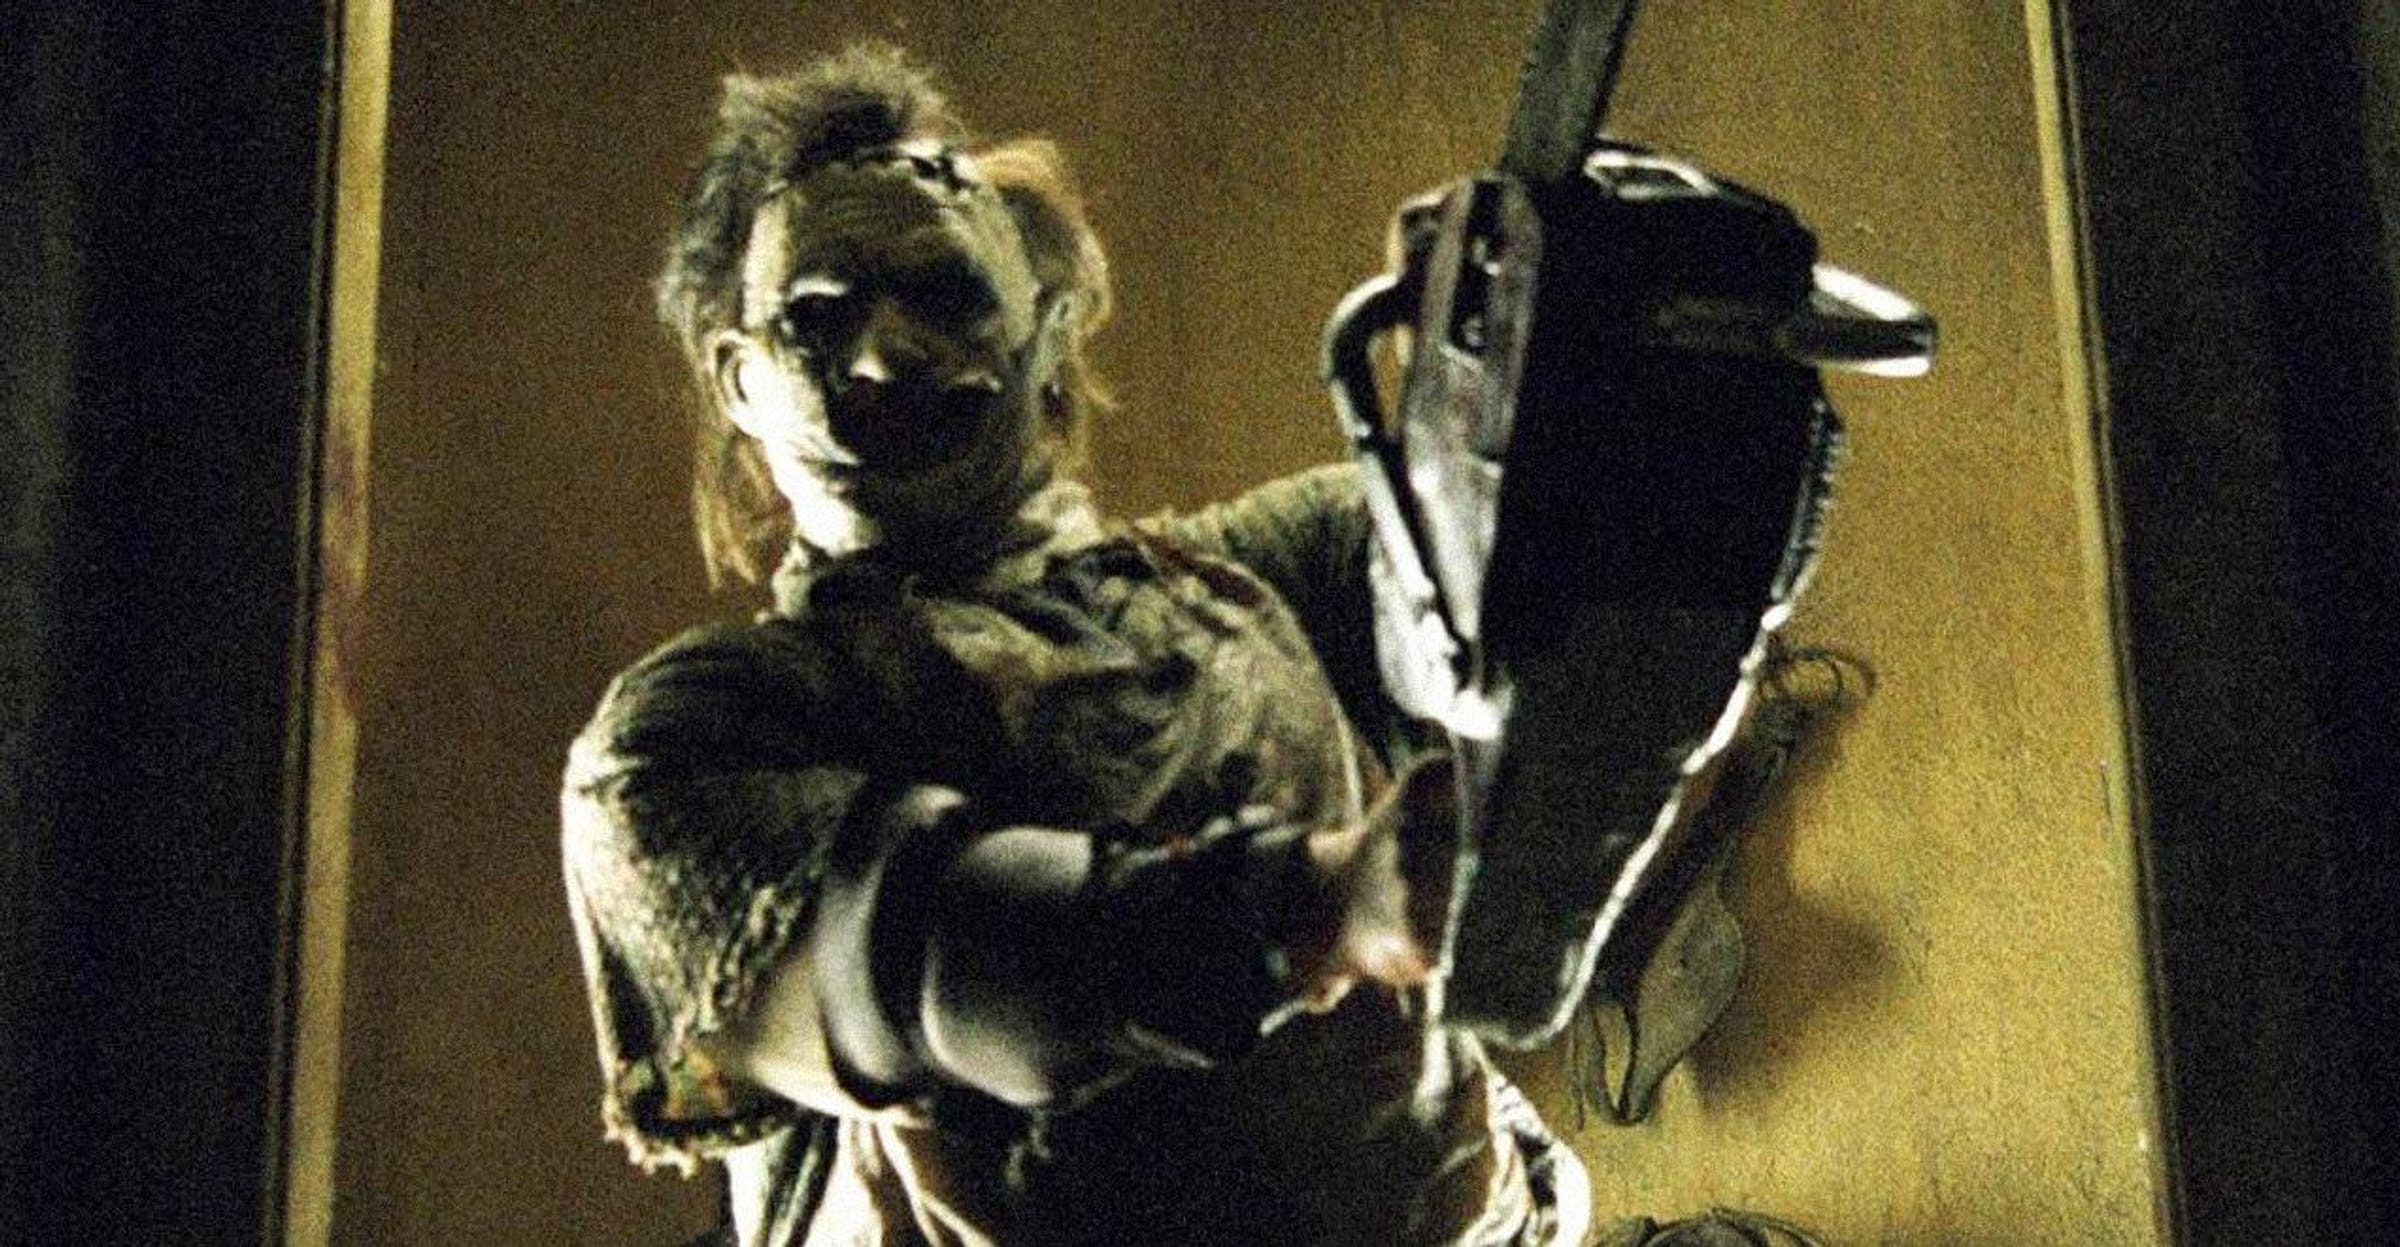 10 Best Slasher Movies Ever Made from Psycho to The Texas Chainsaw